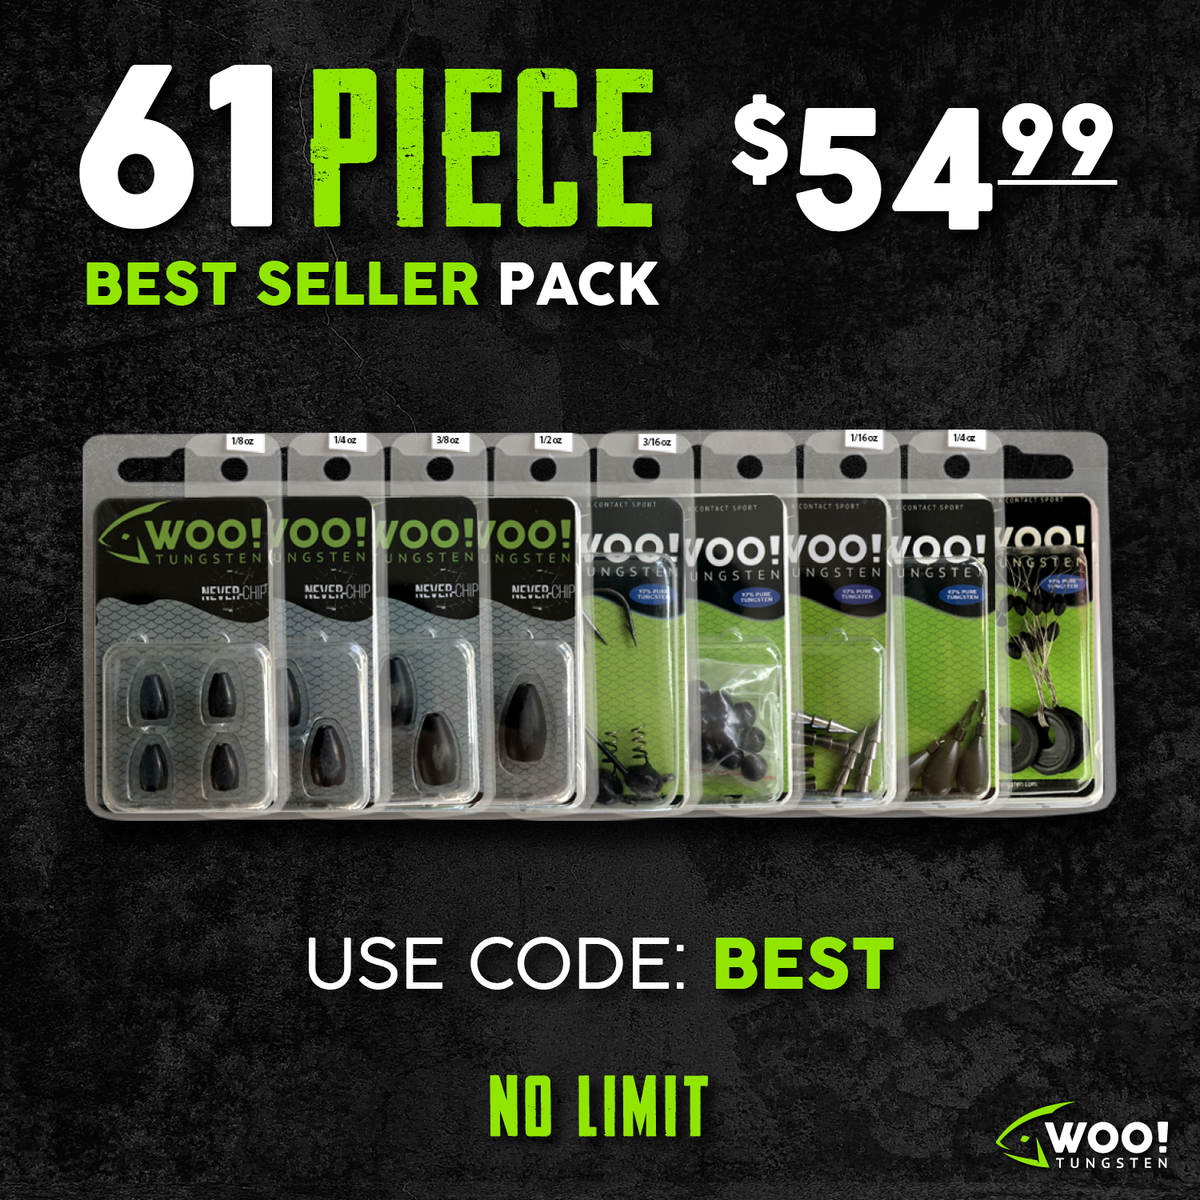 BEST SELLER PACK - 61 Pieces of WOO! Tungsten Best Selling Weights and  Accessories